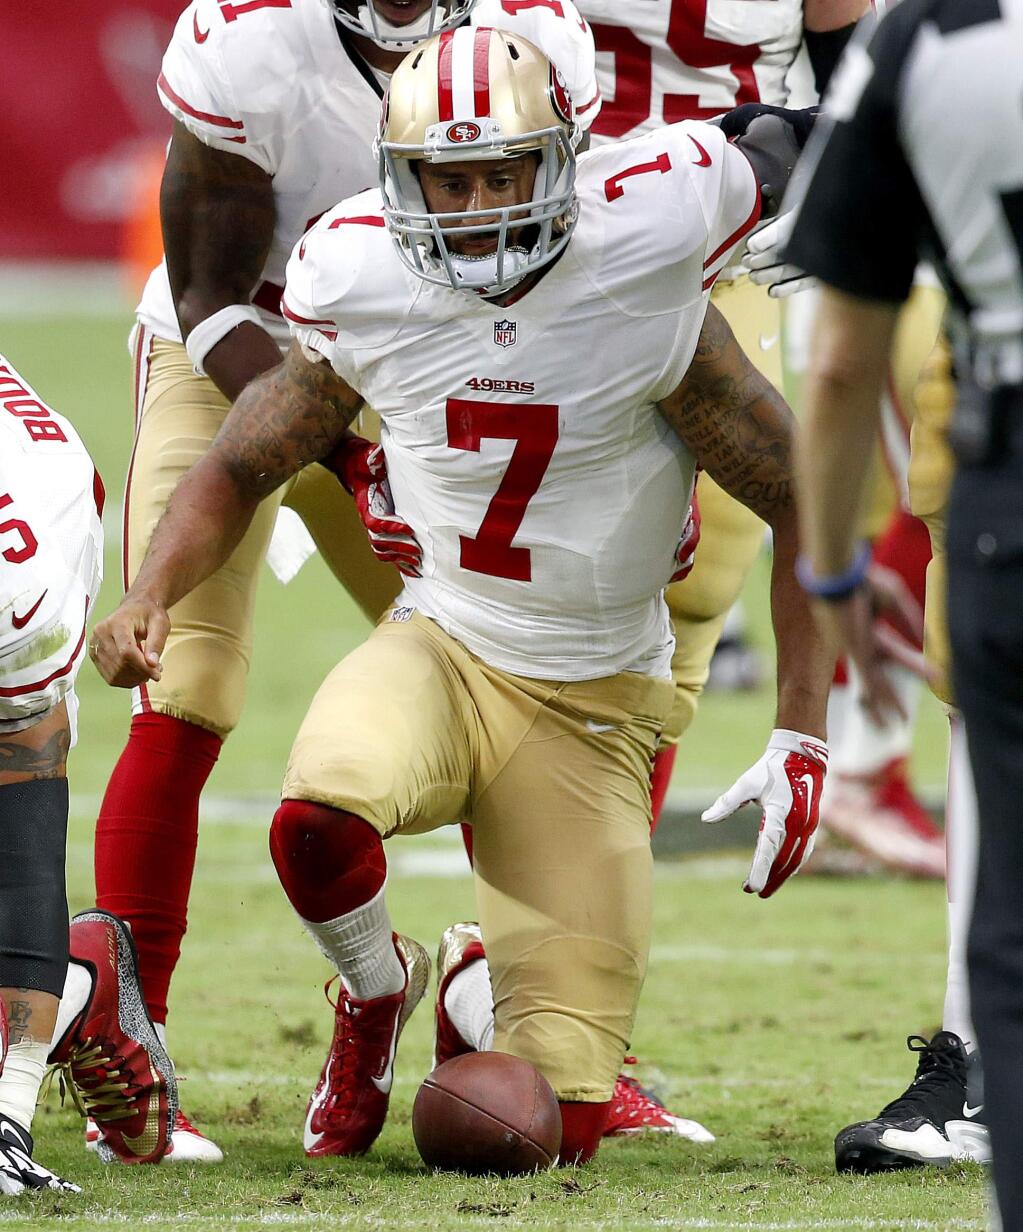 San Francisco 49ers quarterback Colin Kaepernick (7) is helped up after being hit against the Arizona Cardinals during the second half of an NFL football game, Sunday, Sept. 27, 2015, in Glendale, Ariz. (AP Photo/Ross D. Franklin)